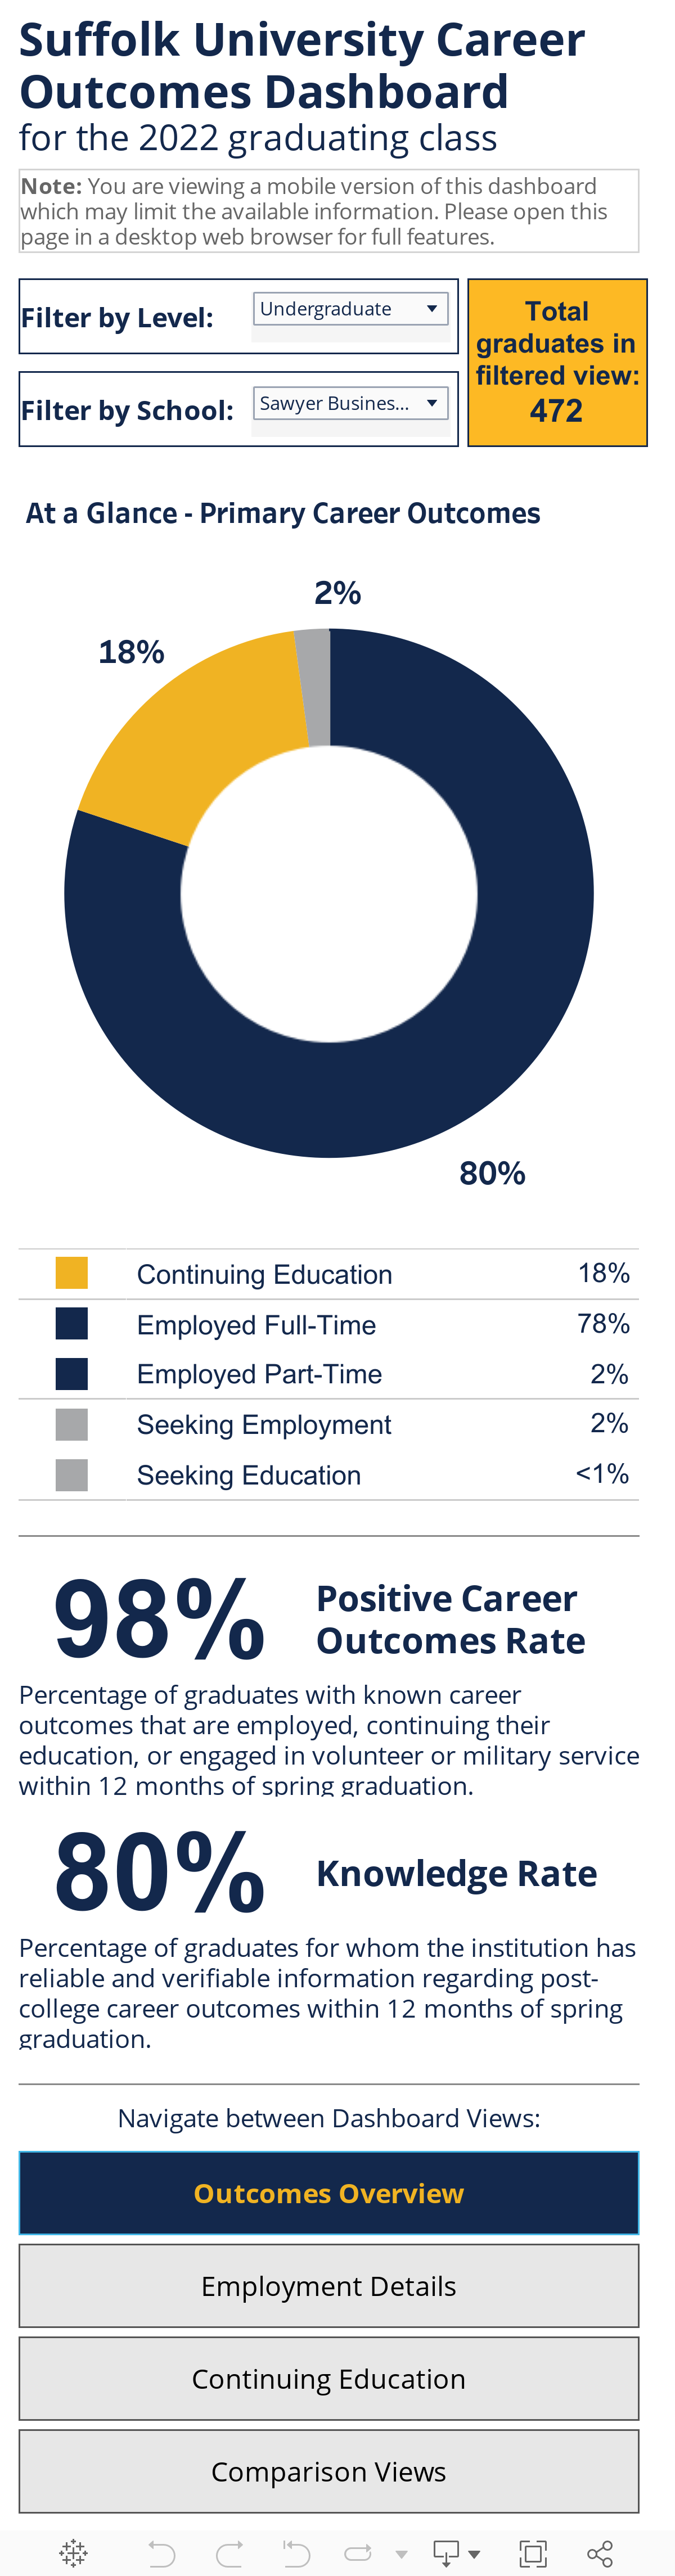 Career Outcomes Overview 